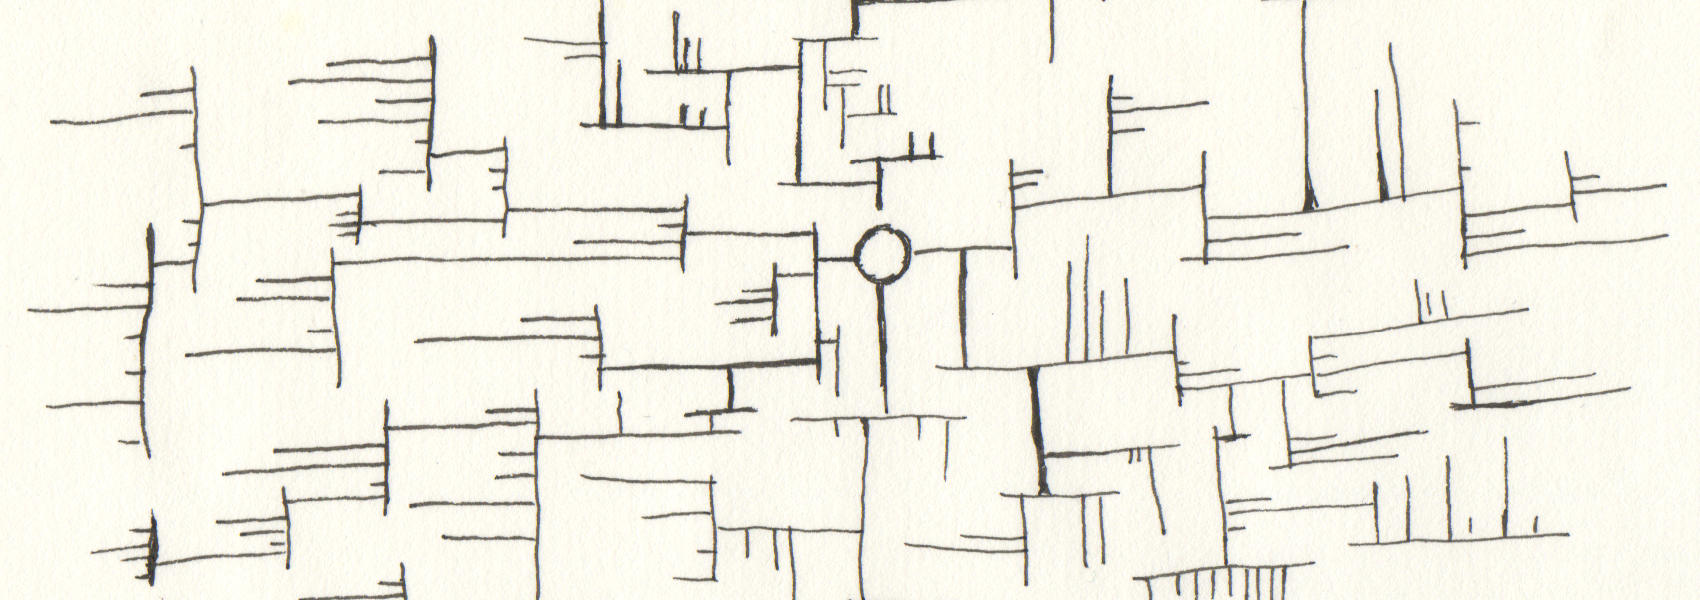 Close crop of Angular Fractal Tree. Ink on paper drawing of an angular tree-like diagram branching out from a central circle. . Own work. 2020.